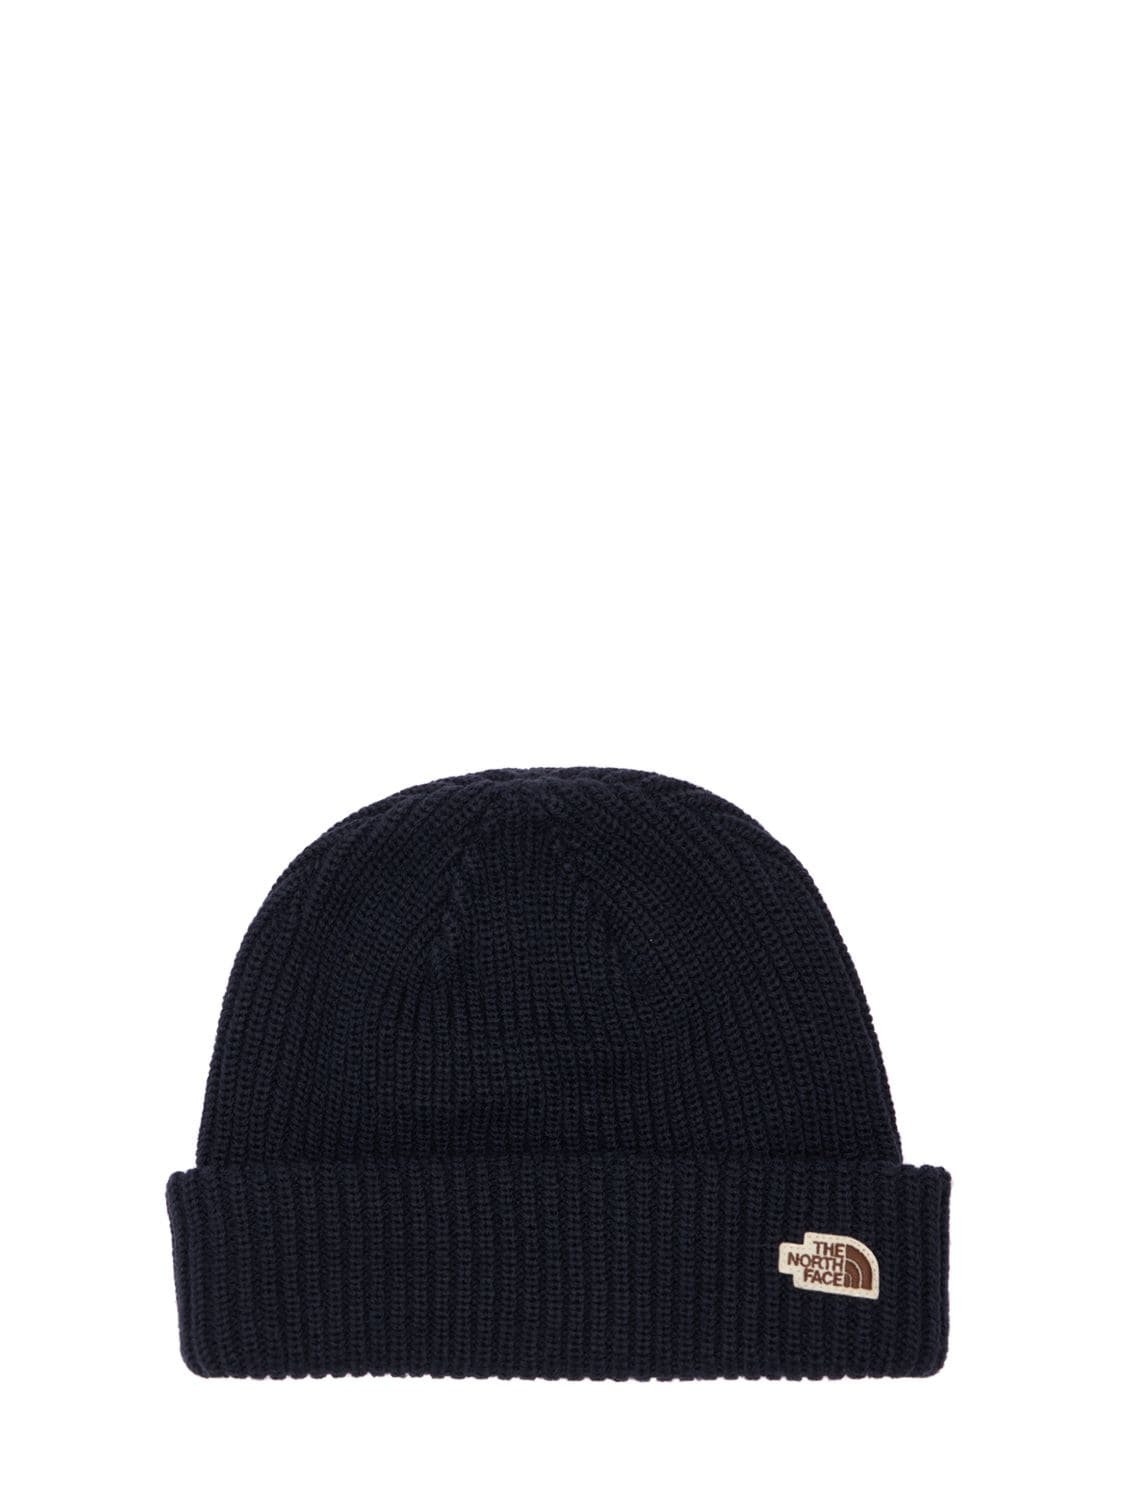 The North Face Salty Dog Beanie In Navy